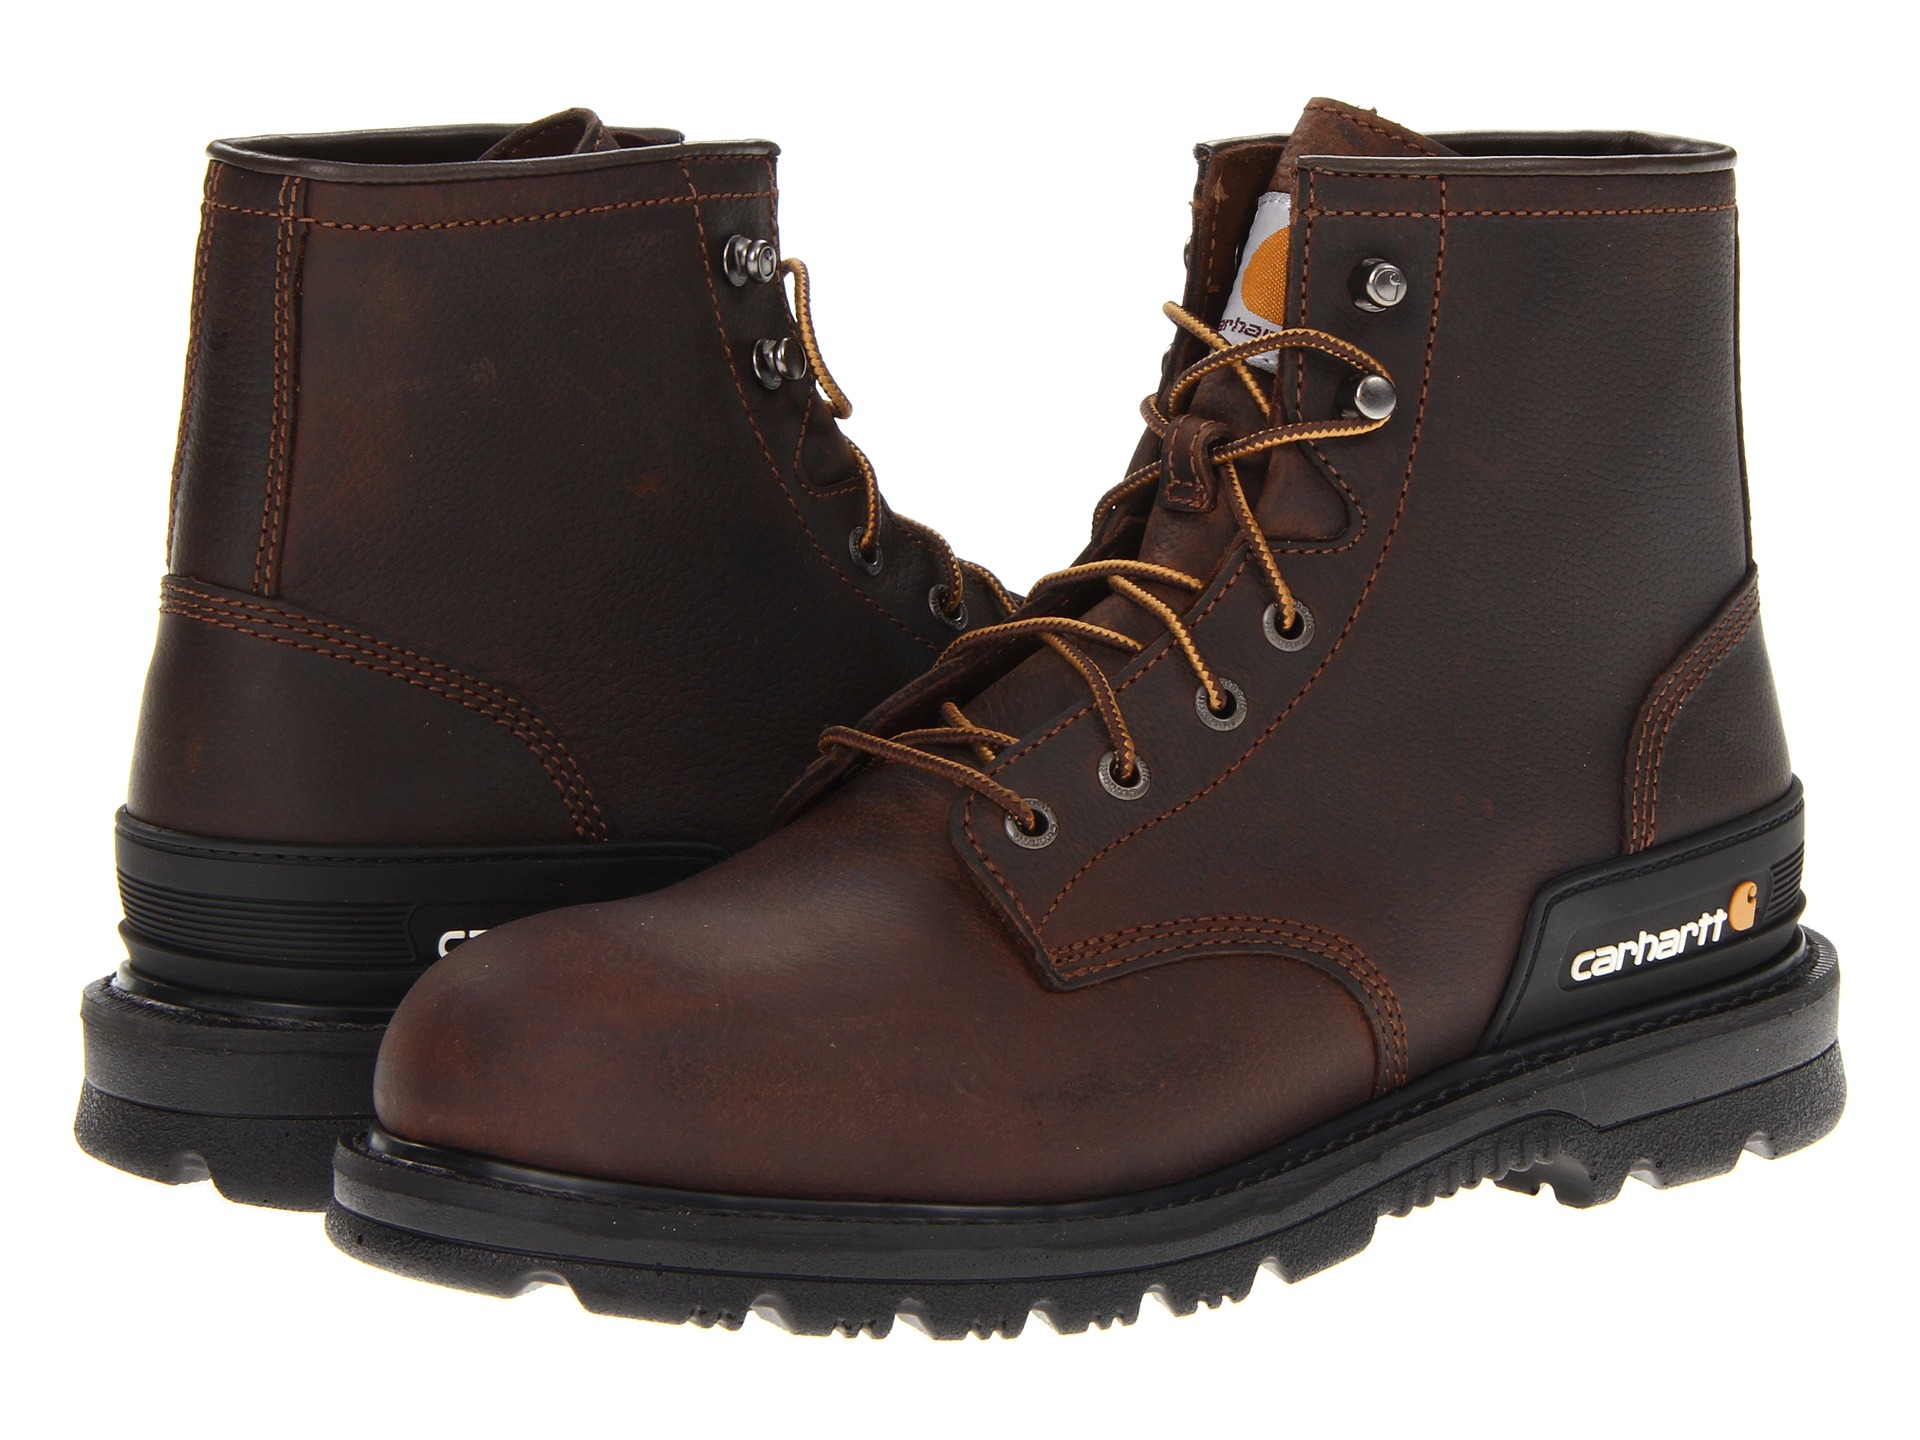 Carhartt 6 Unlined Work Boot | Shipped Free at Zappos